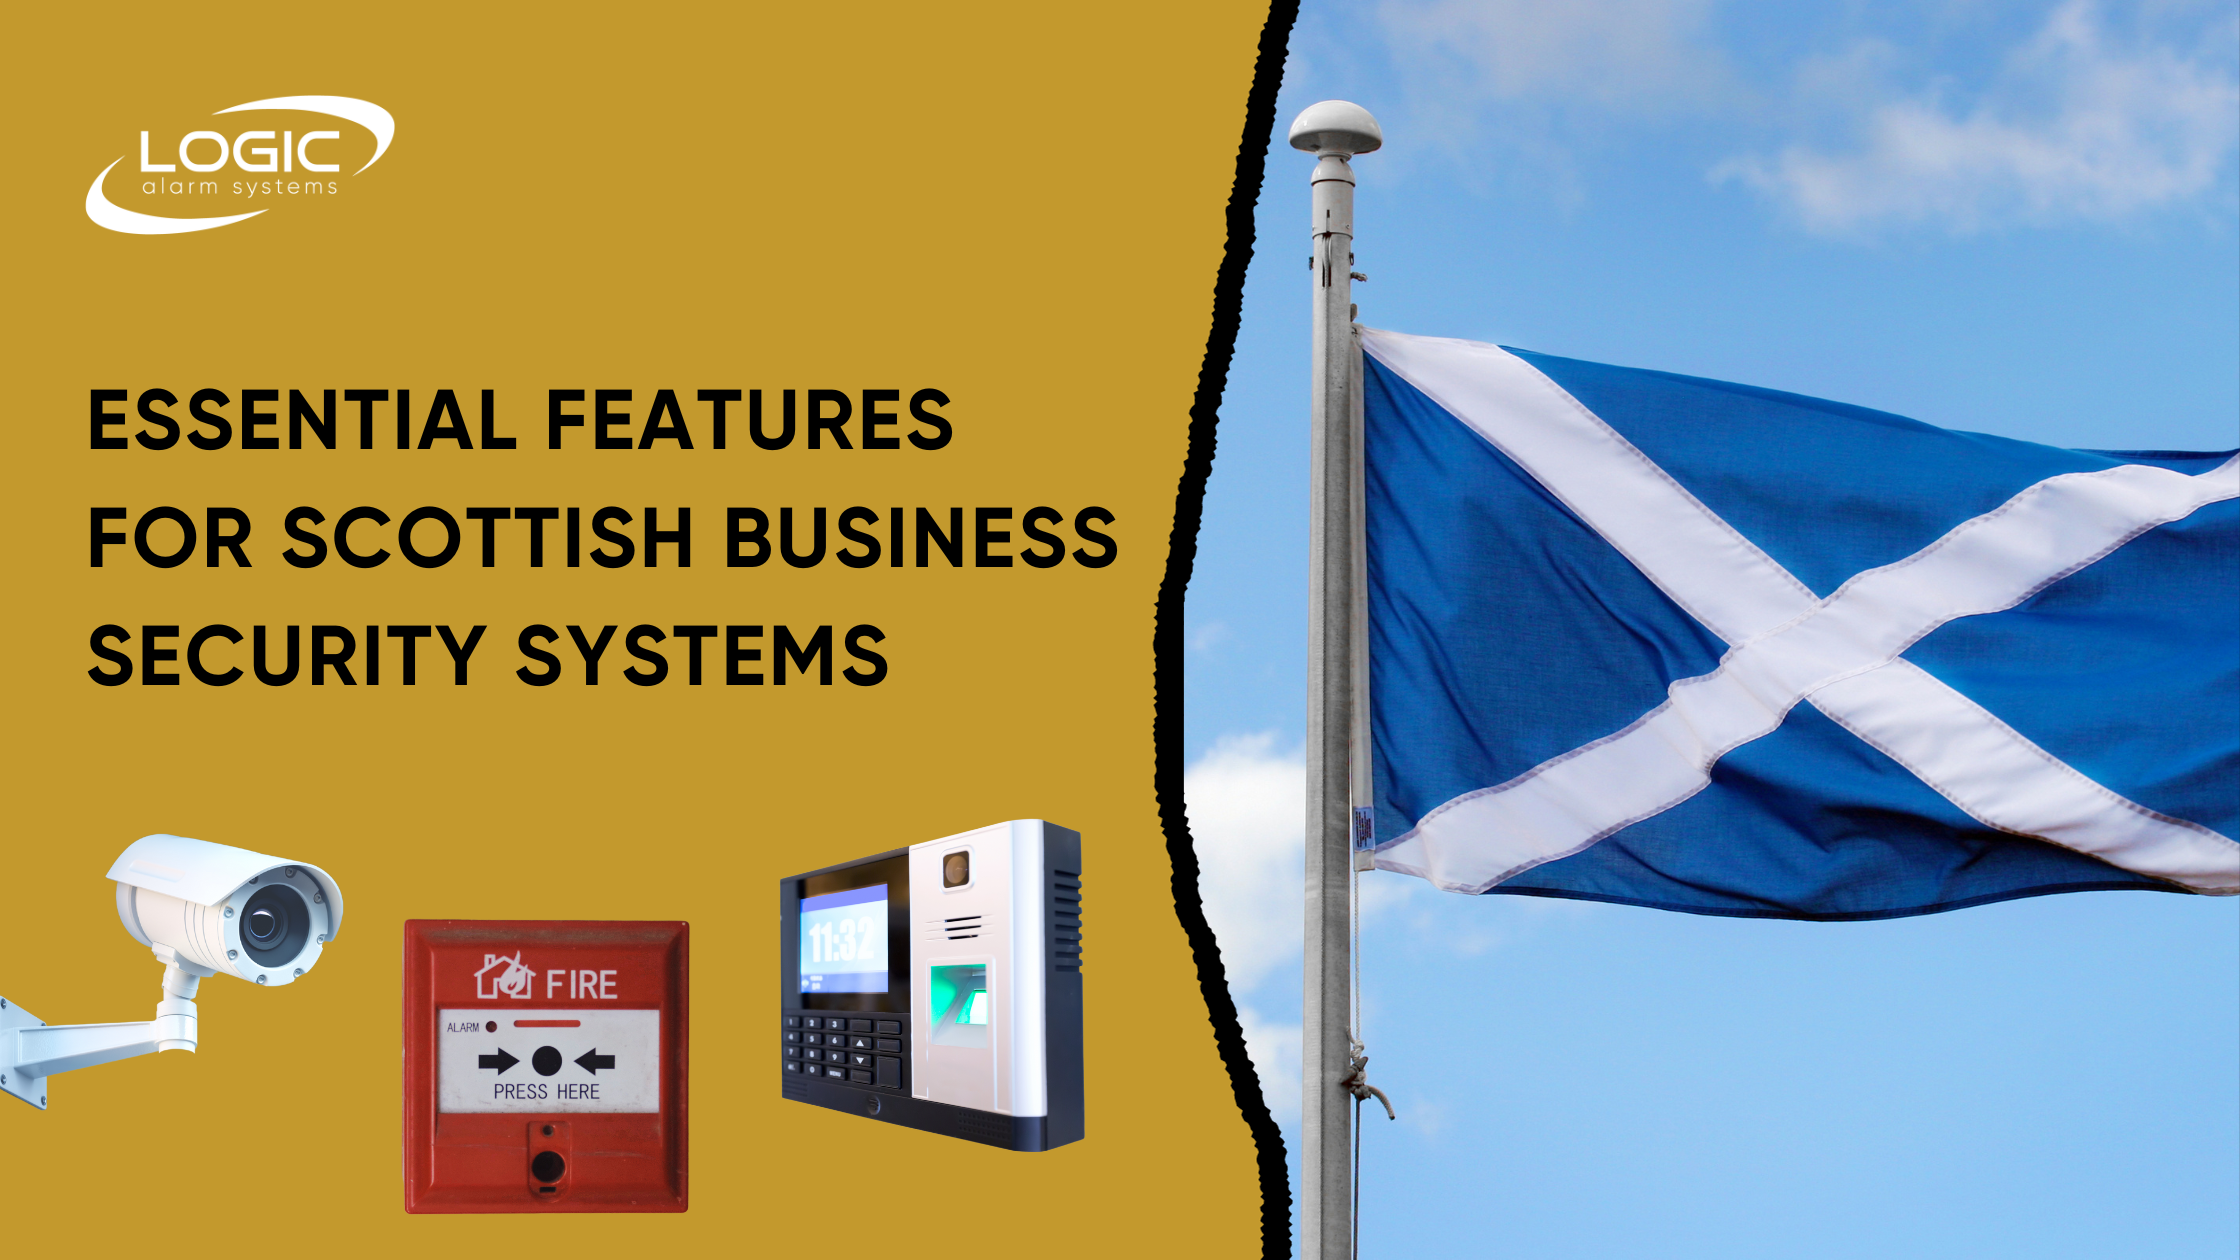 Blog banner image with blog title “Essential Feature For Scottish Business Security Systems”, CCTV camera, fire alarm, access control system, and the Scottish flag.